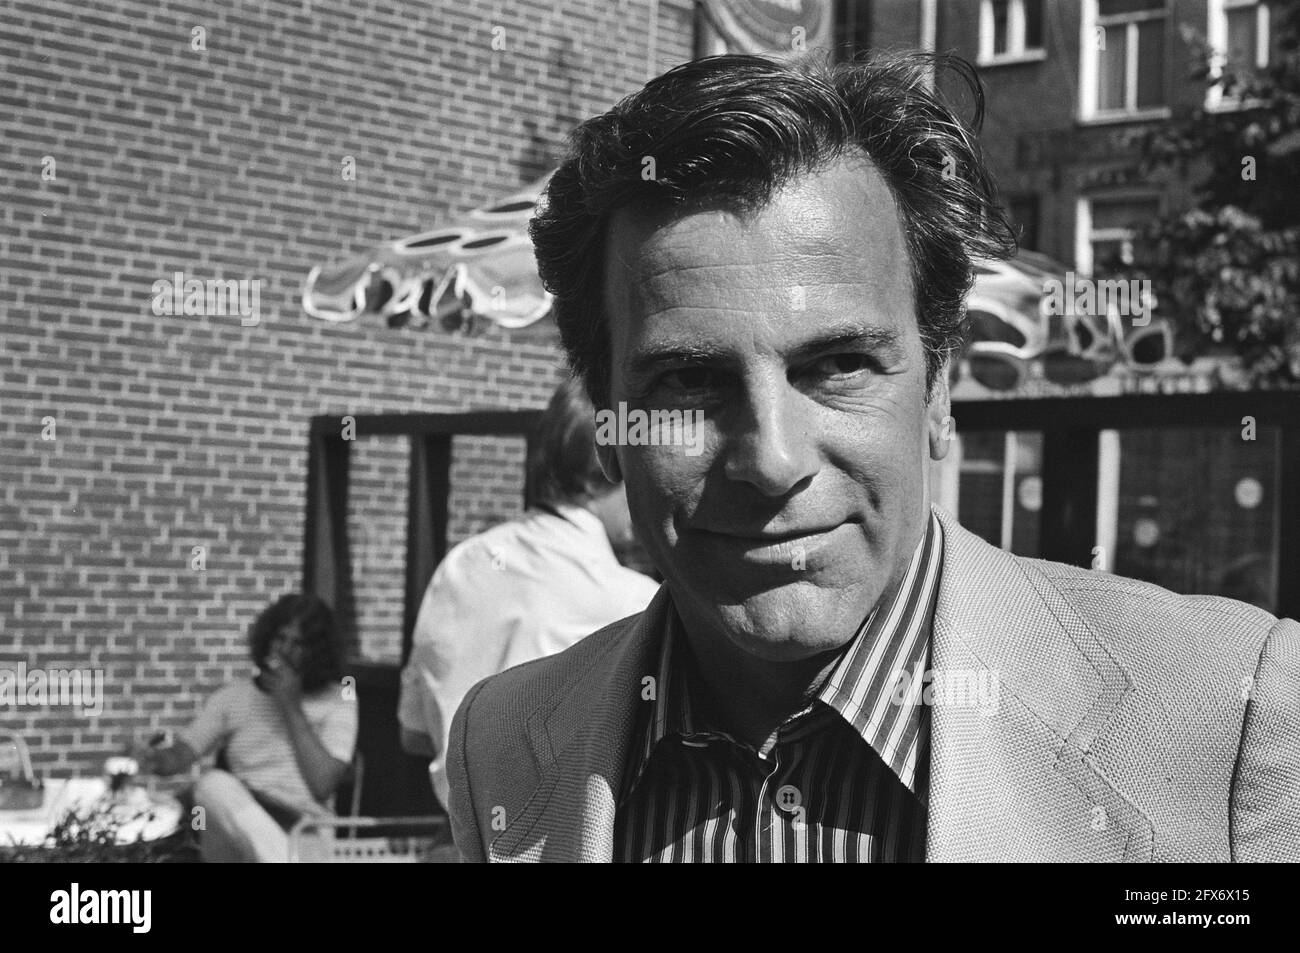 Actor Maximilian Schell in  a Bridge too Far, gives press conference in, left producer Levine, right Schell with boot of beer, June 13, 1976, actors, films, film stars, press conferences, portraits, The Netherlands, 20th century press agency photo, news to remember, documentary, historic photography 1945-1990, visual stories, human history of the Twentieth Century, capturing moments in time Stock Photo